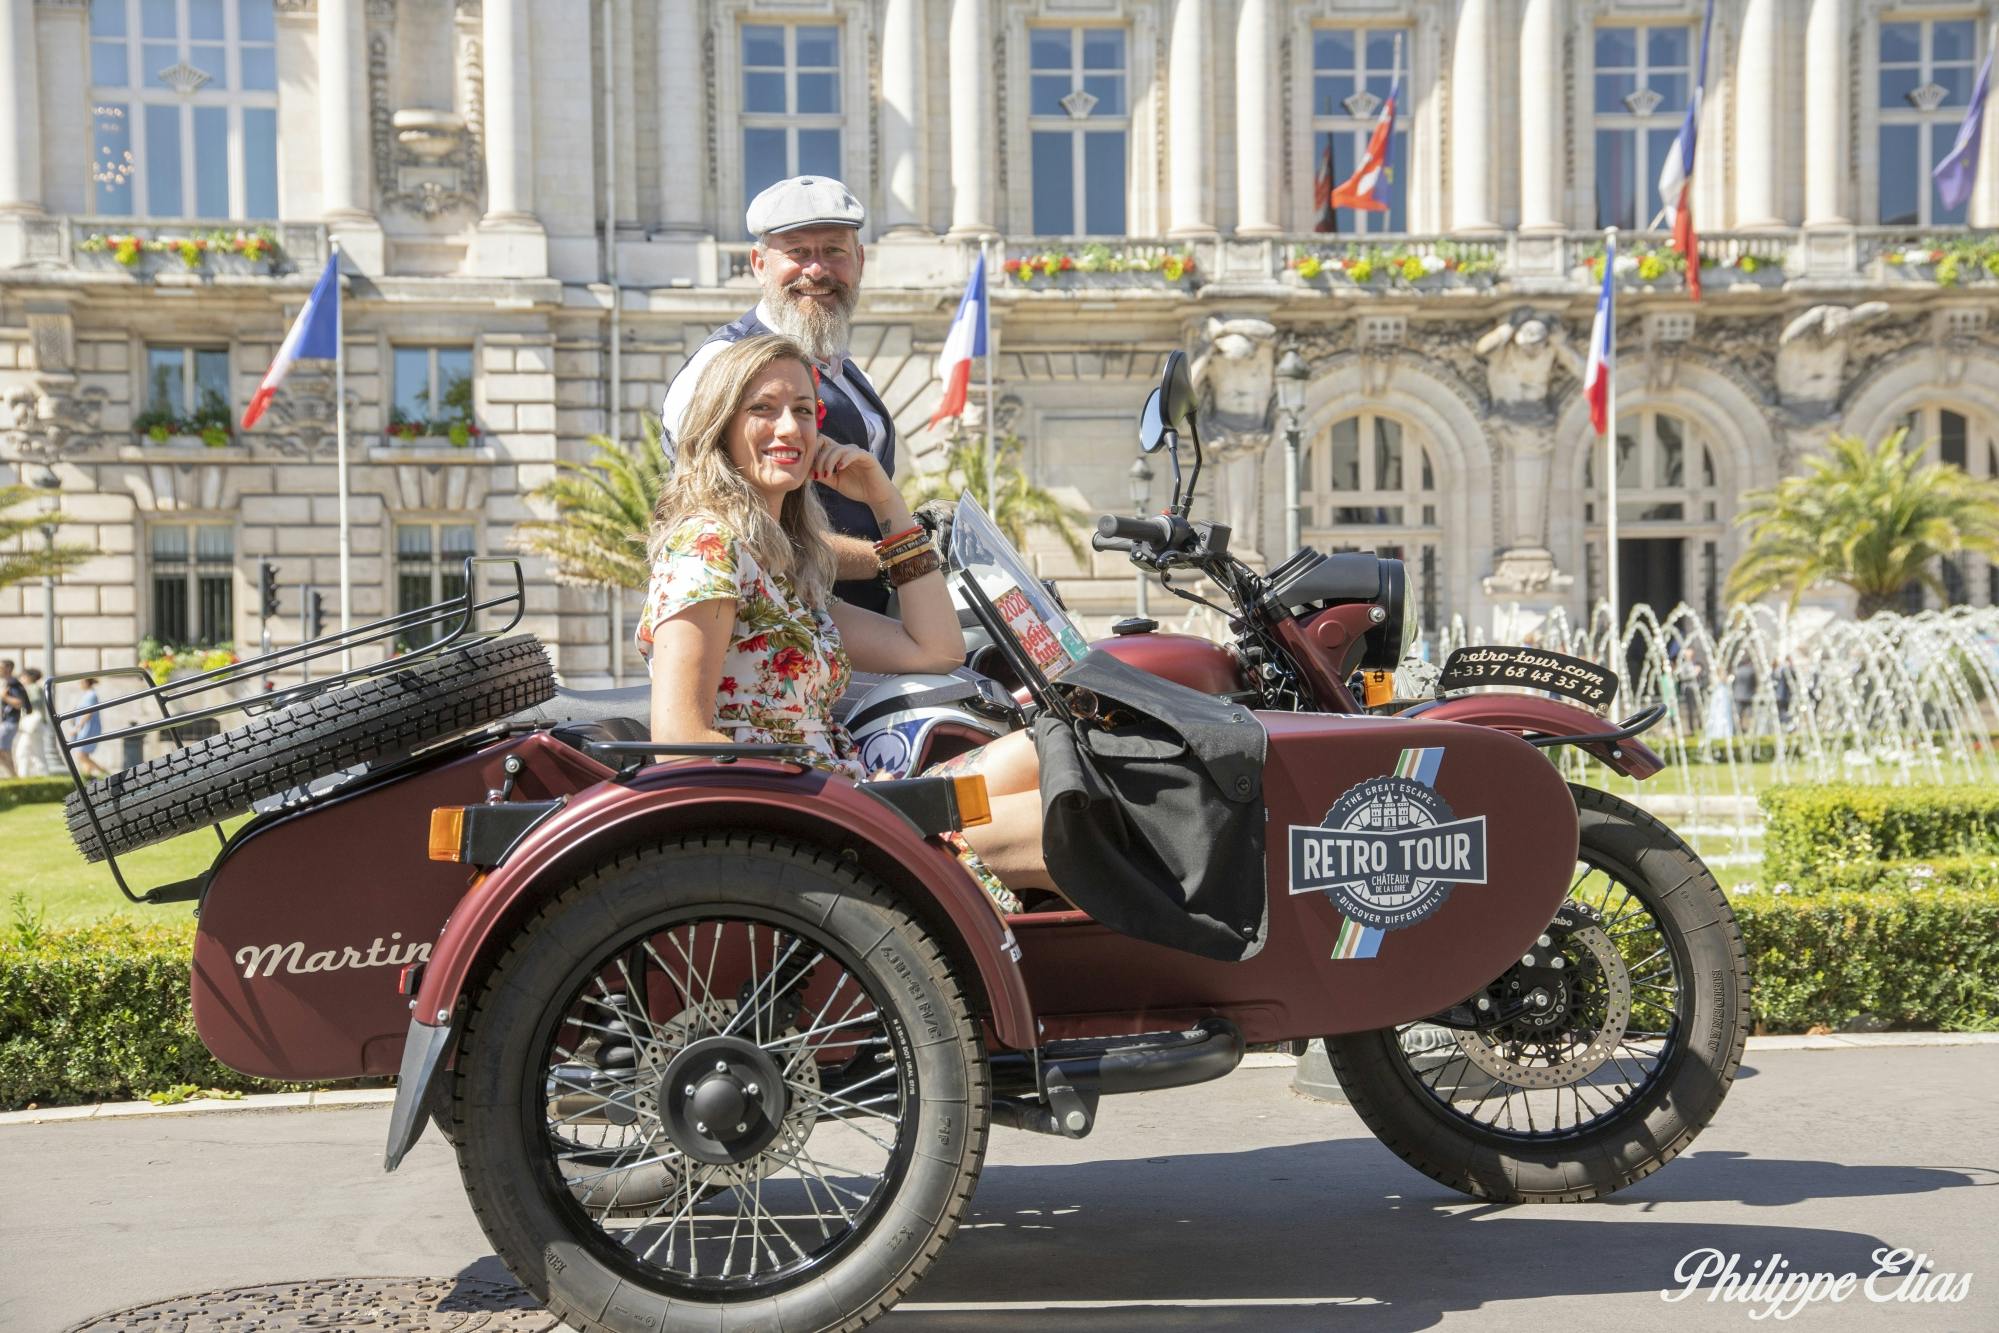 Great Escape sidecar tour from Tours